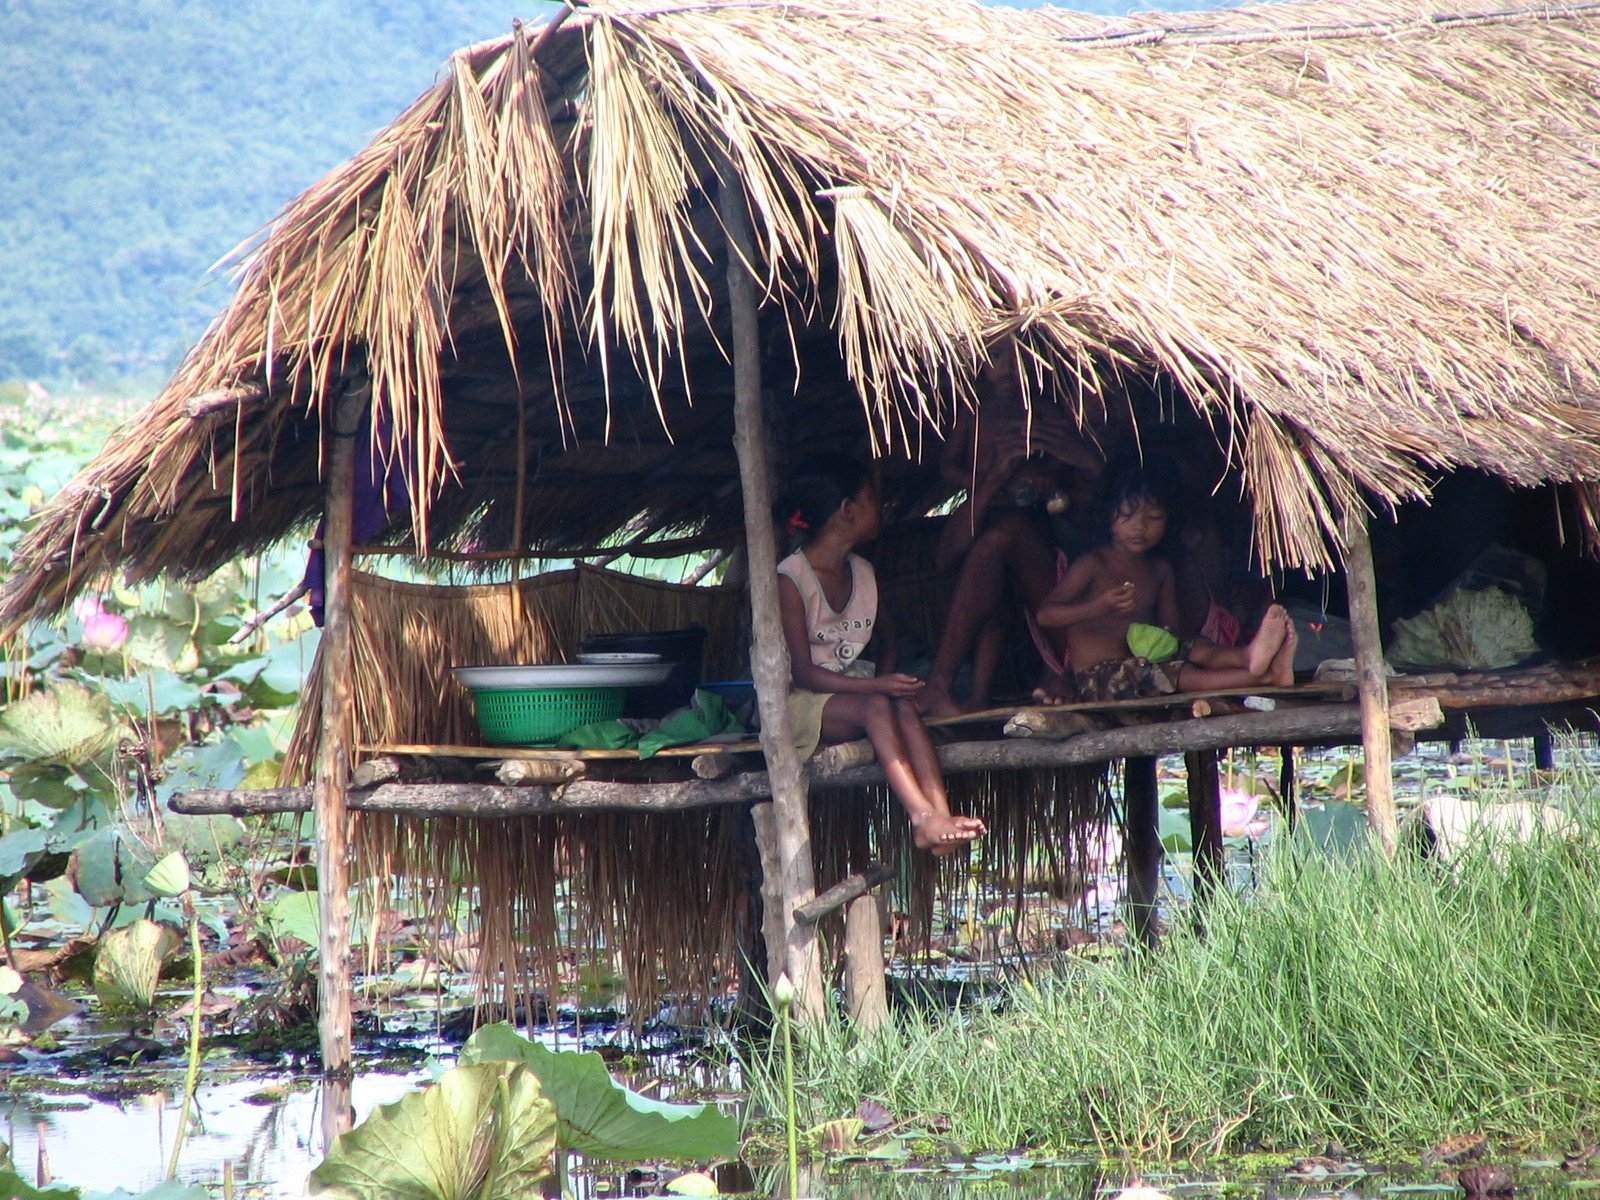 the people sit at the bottom of the hut